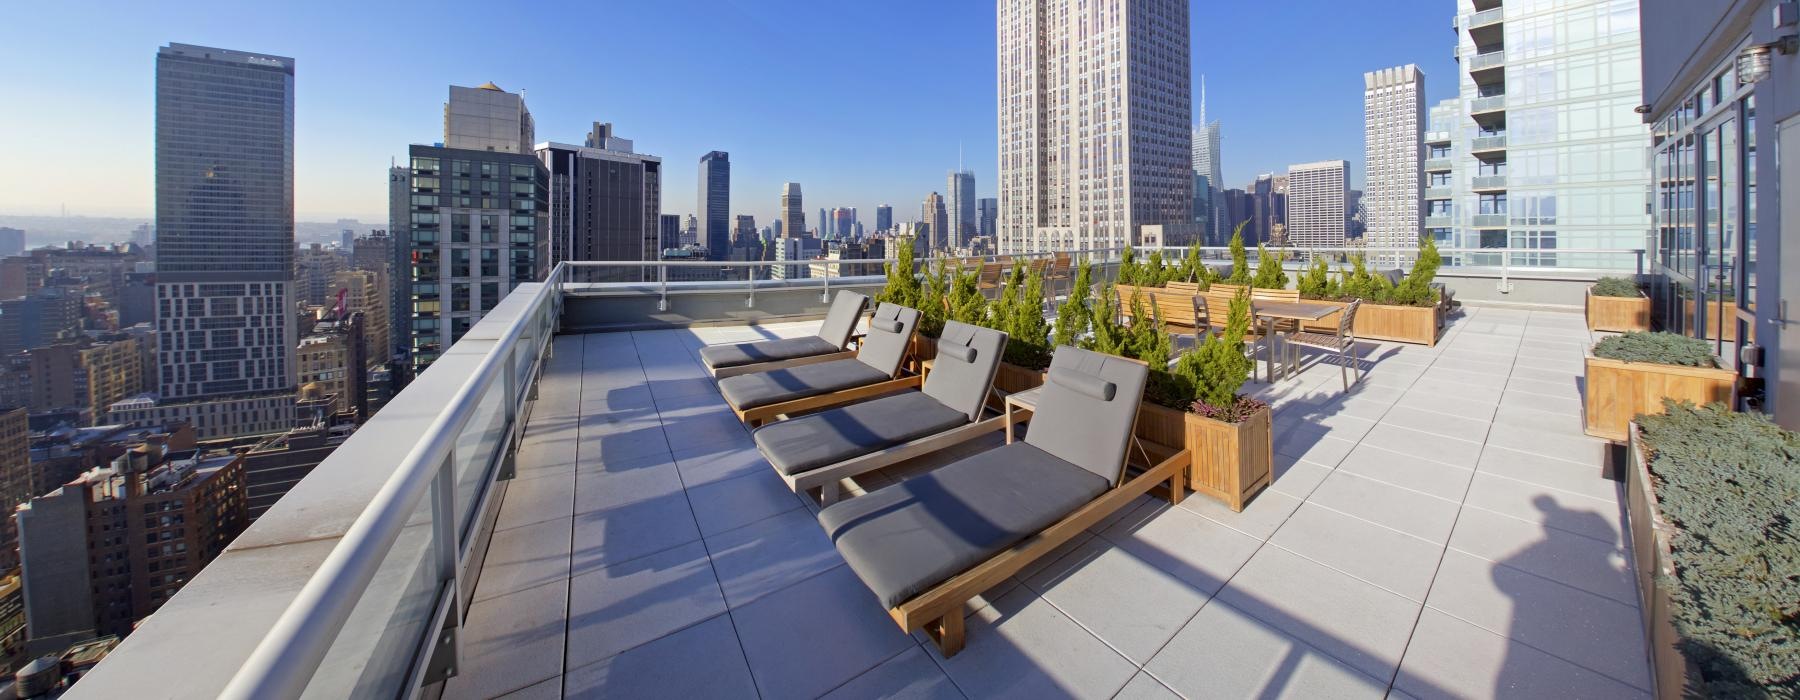 lounge chairs on rooftop terrace